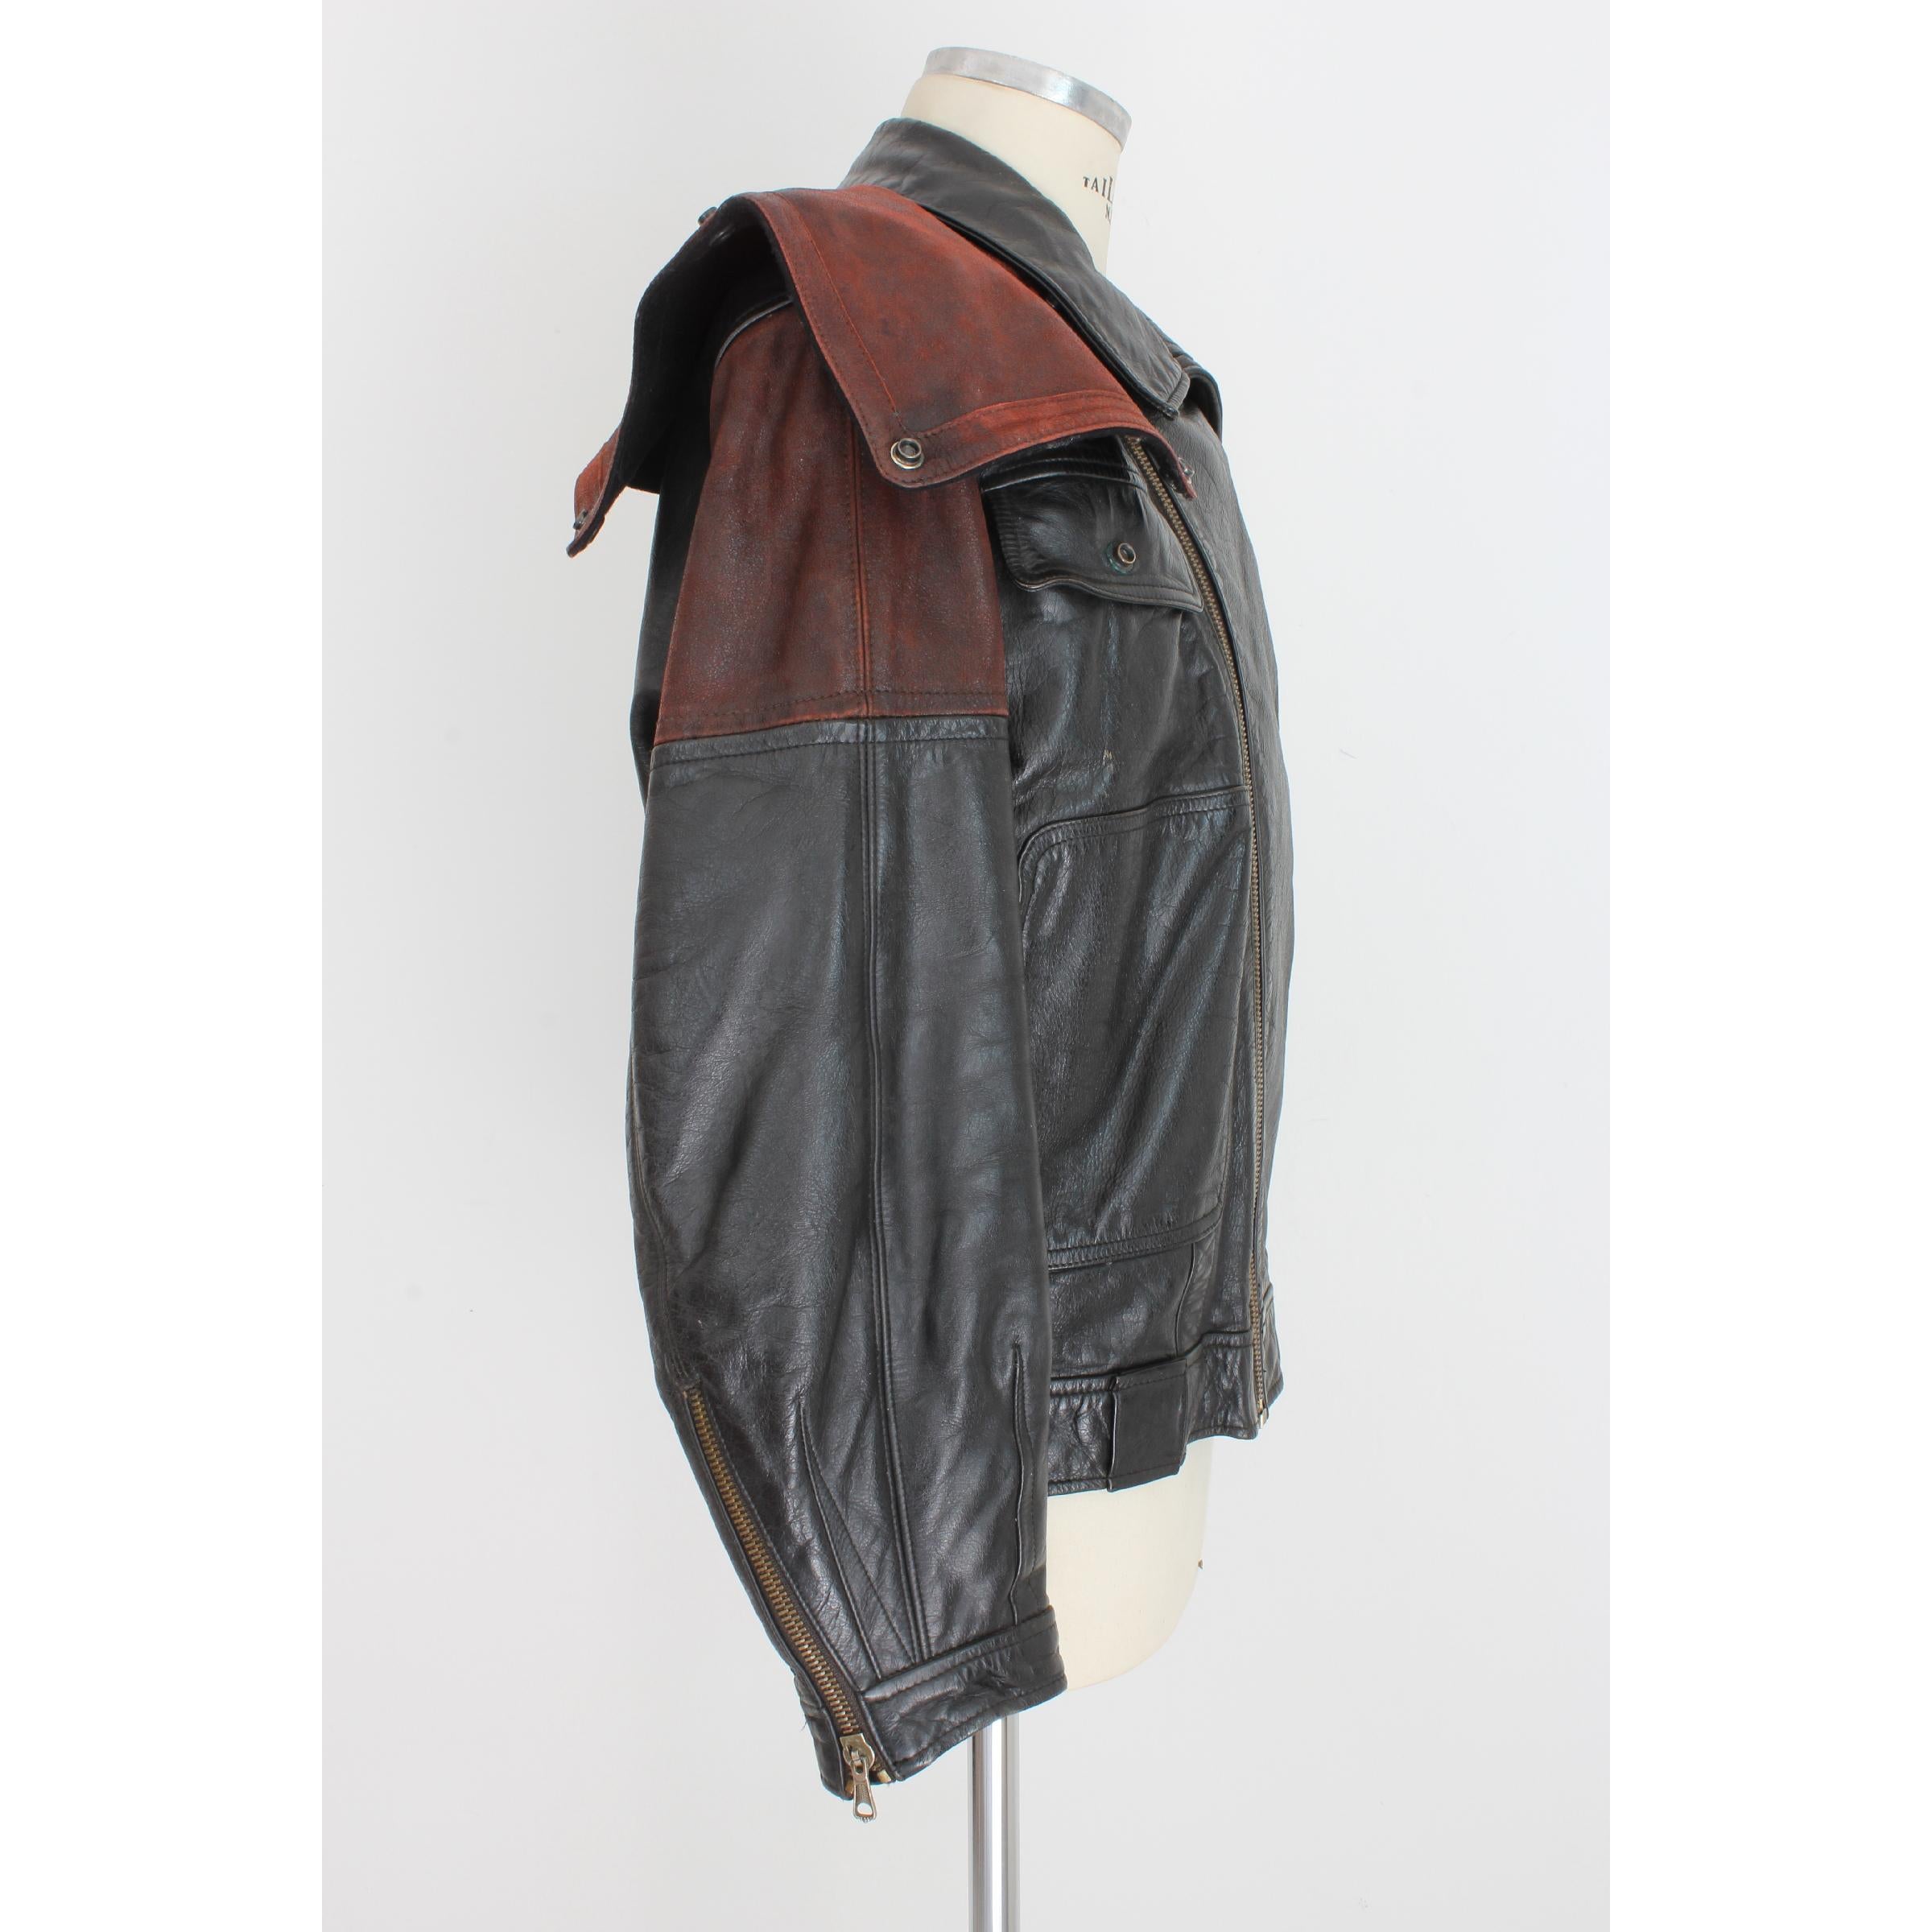 Emporio Armani vintage men's jacket, biker model, black, 100% leather, 1980s. The jacket has burgundy leather inserts and applied studs. Made in Italy. Very good vintage condition.
Size: 52 It 42 Us 42 Uk
Shoulder: 52 cm
Bust / Chest: 58 cm
Sleeve: